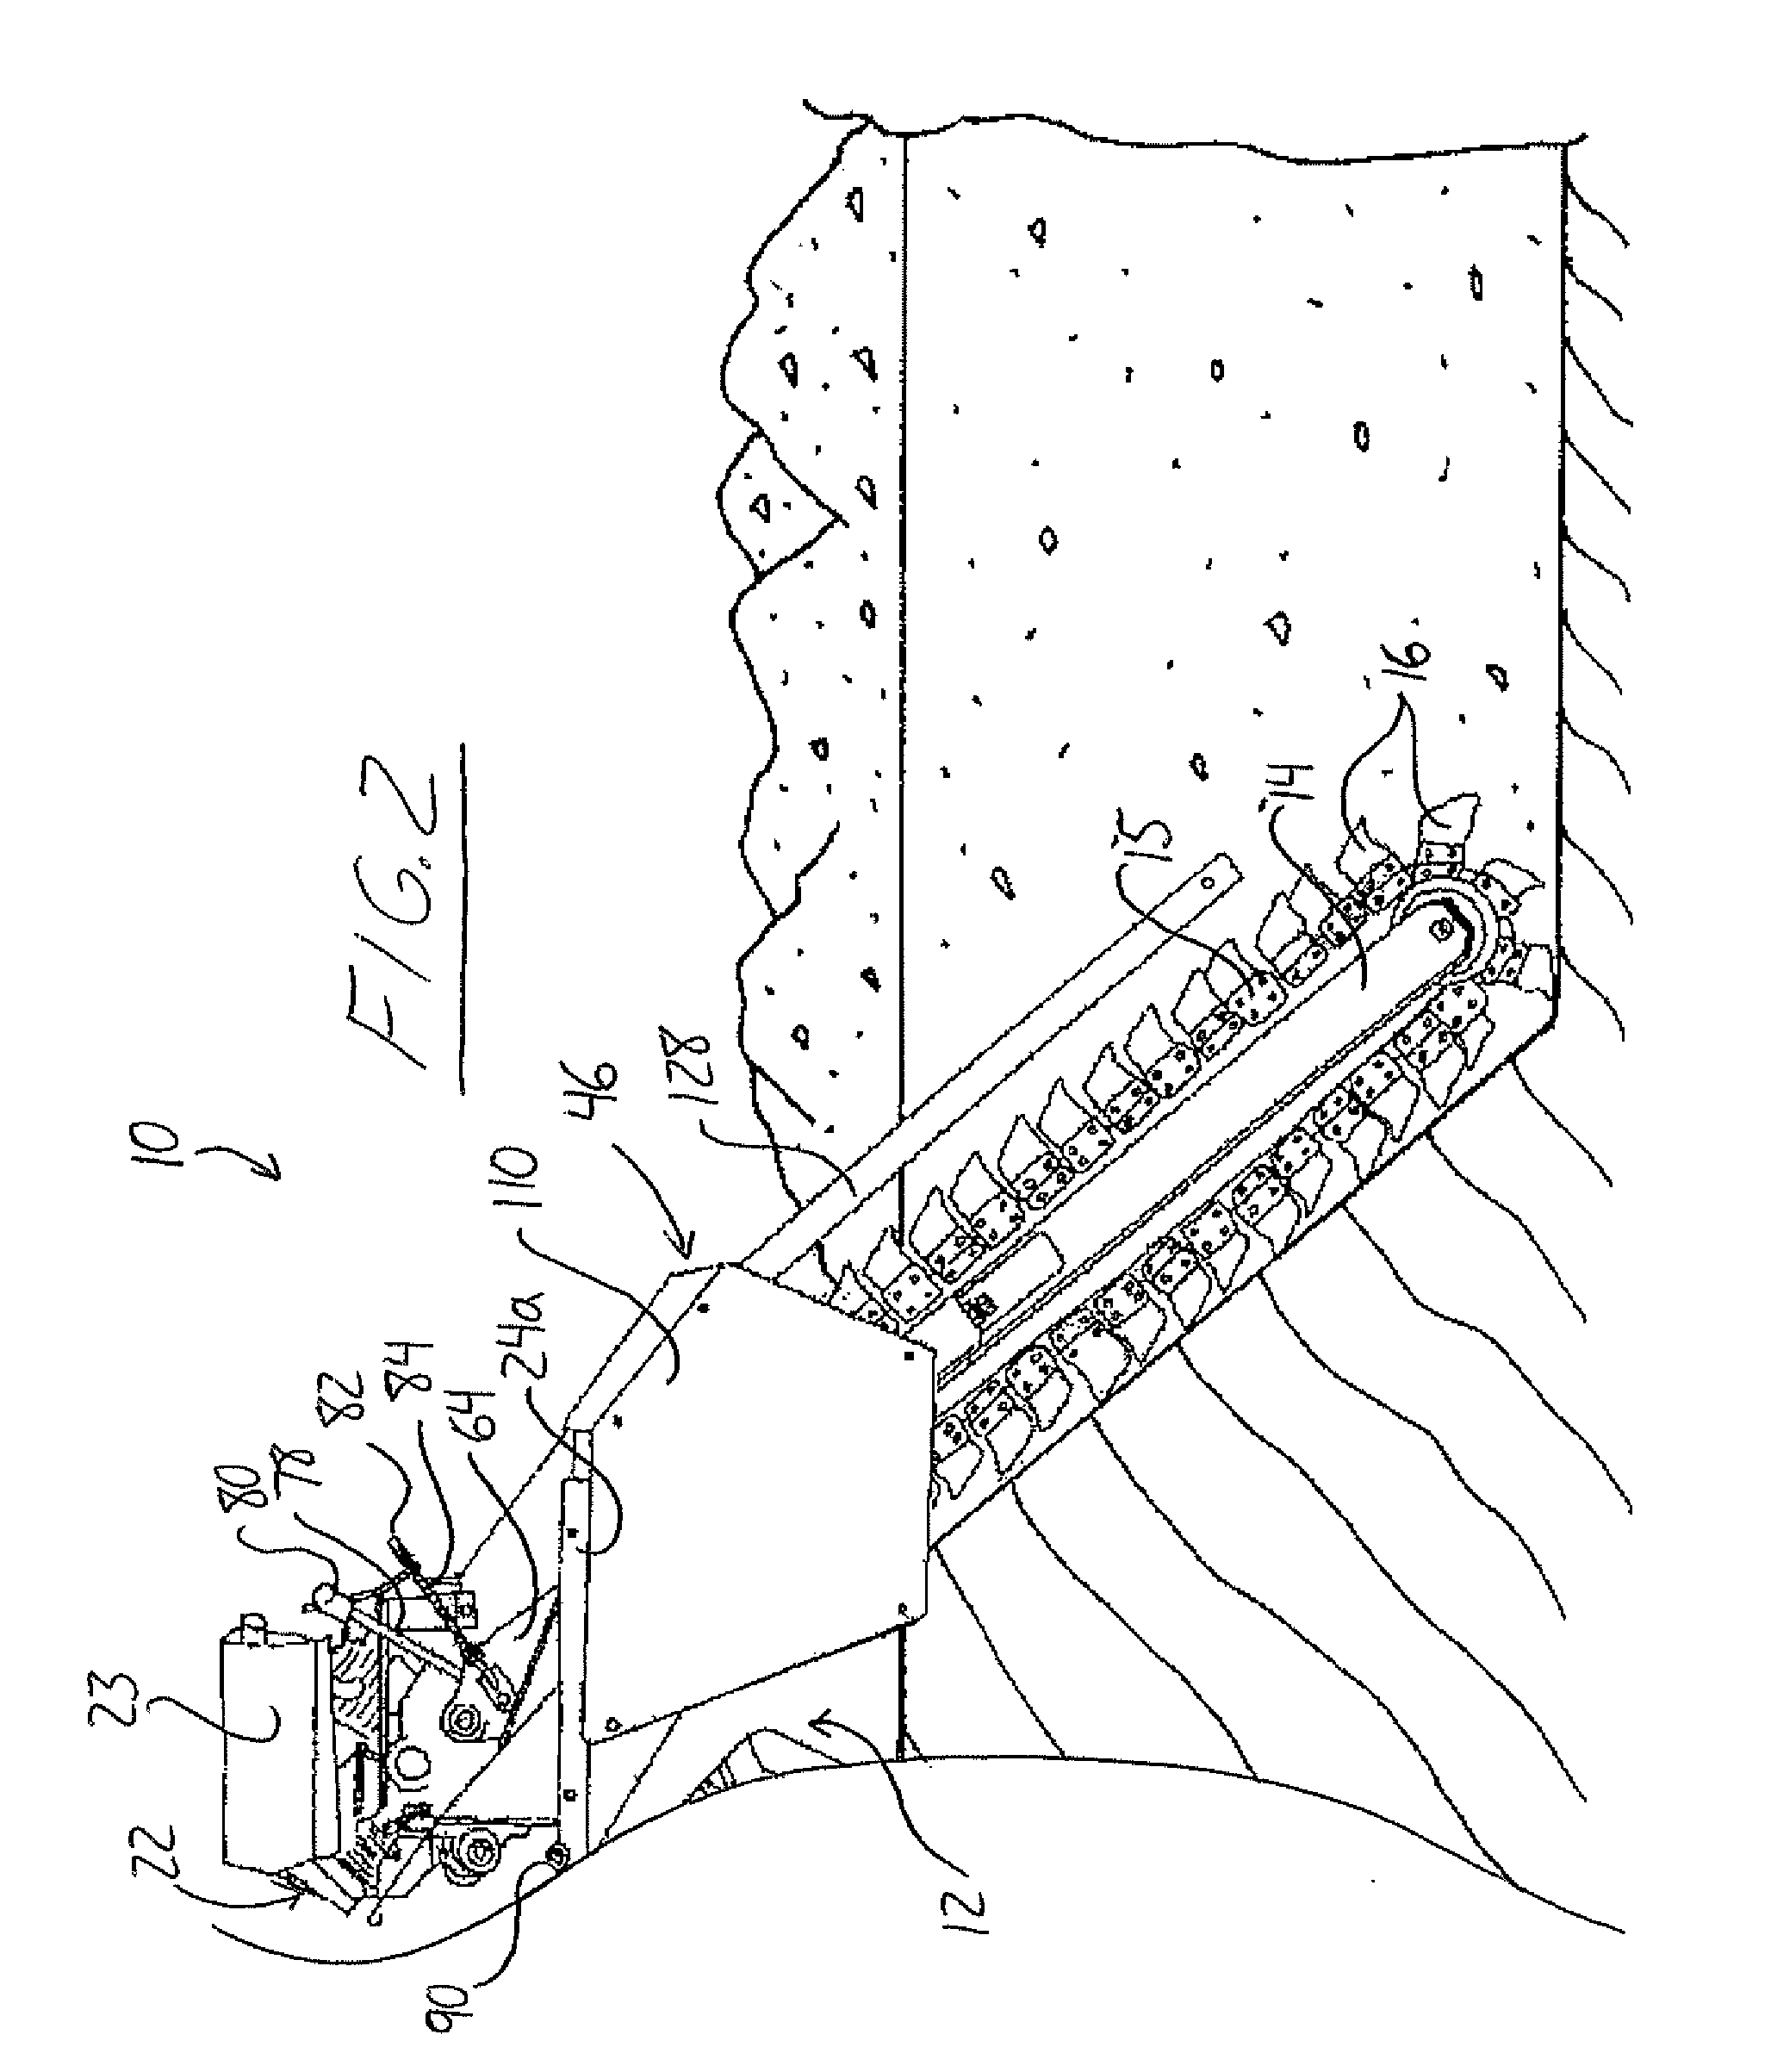 Trenching Attachment Having an Internal Combustion Engine